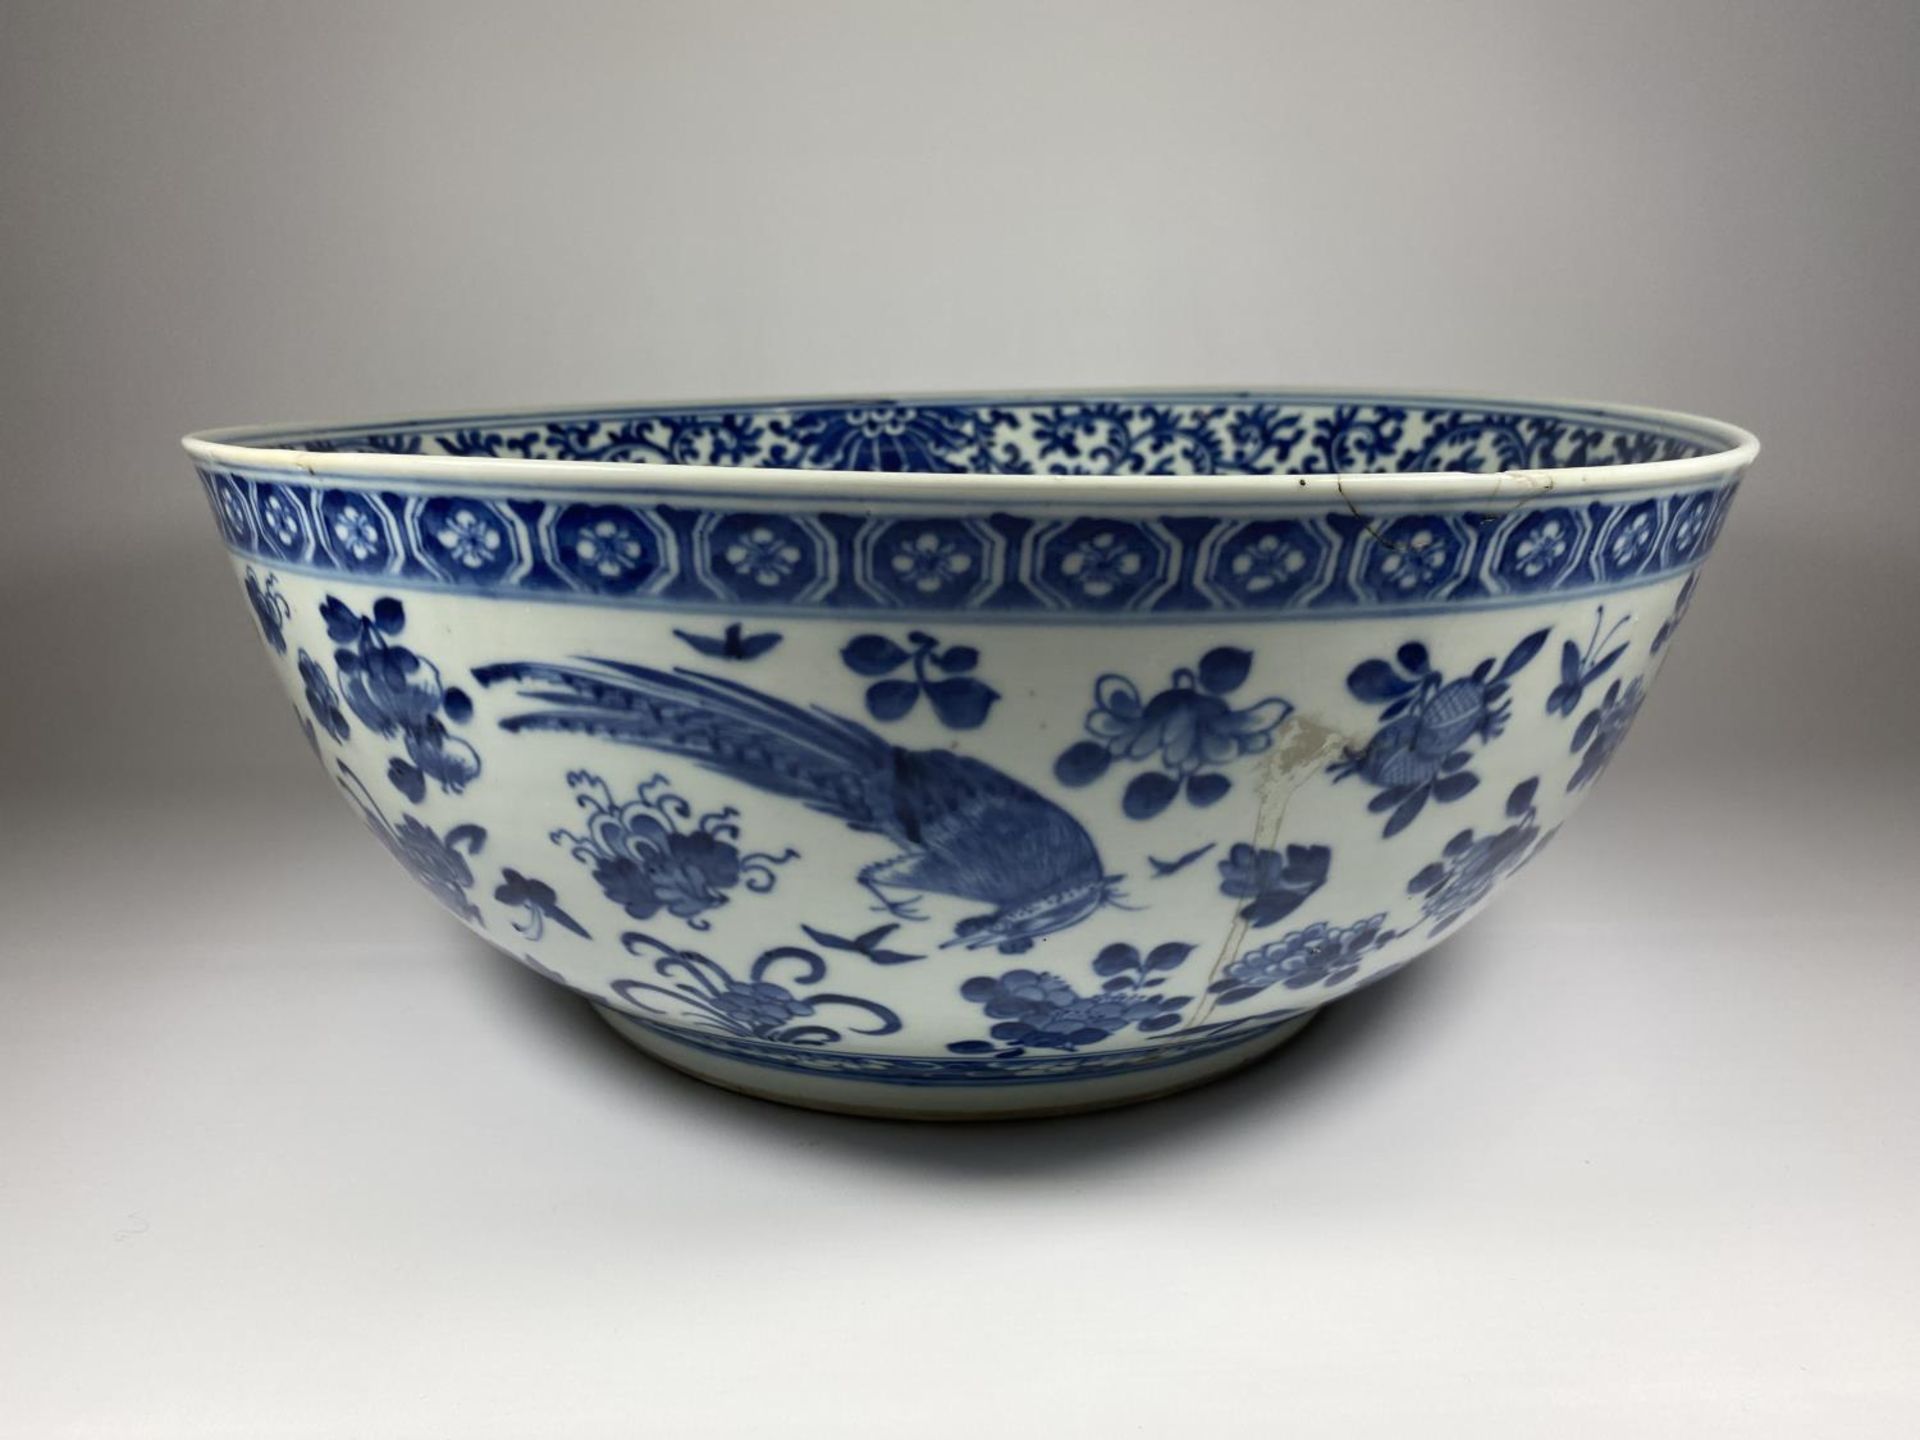 A LARGE AND IMPRESSIVE EARLY 19TH CENTURY CHINESE QING BLUE AND WHITE PORCELAIN PUNCH / FRUIT BOWL - Image 6 of 14